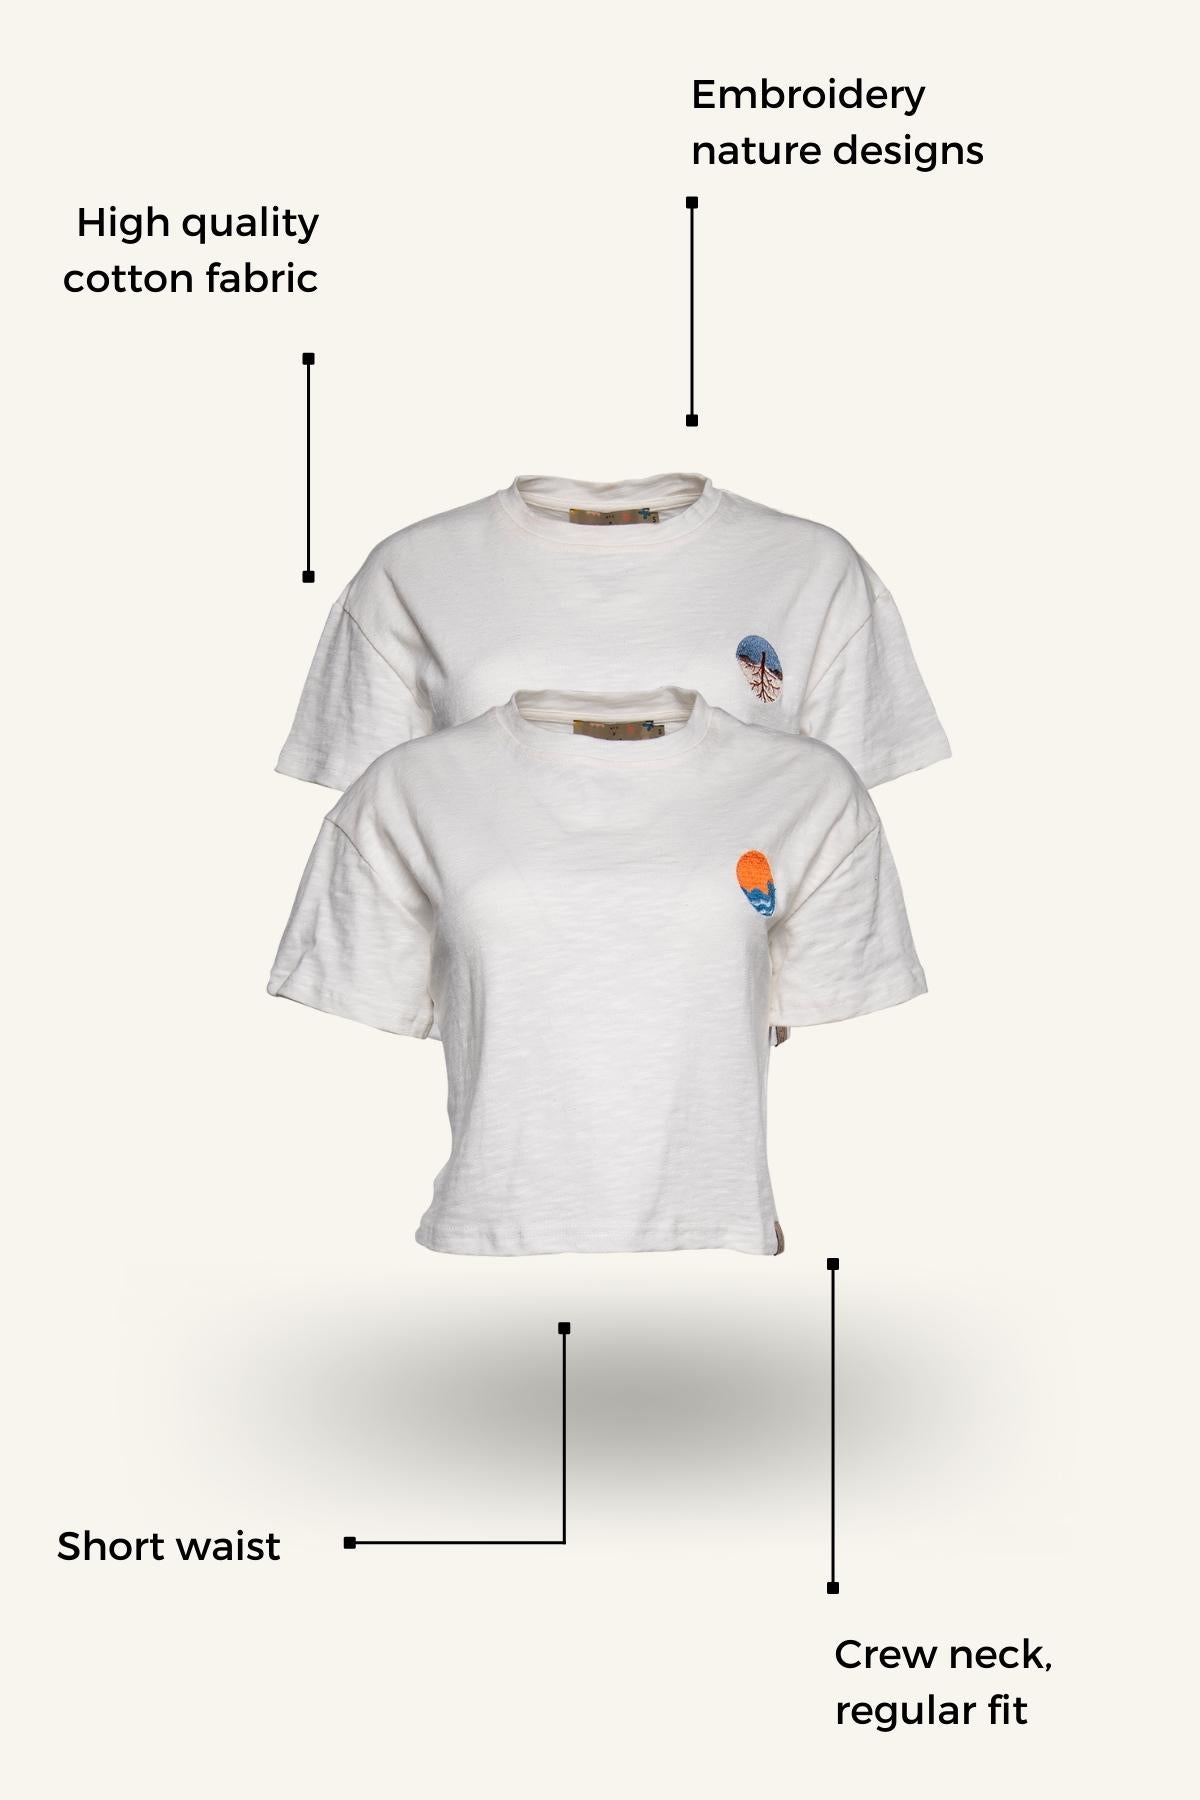 nature-embroidery-t-shirt-infographic